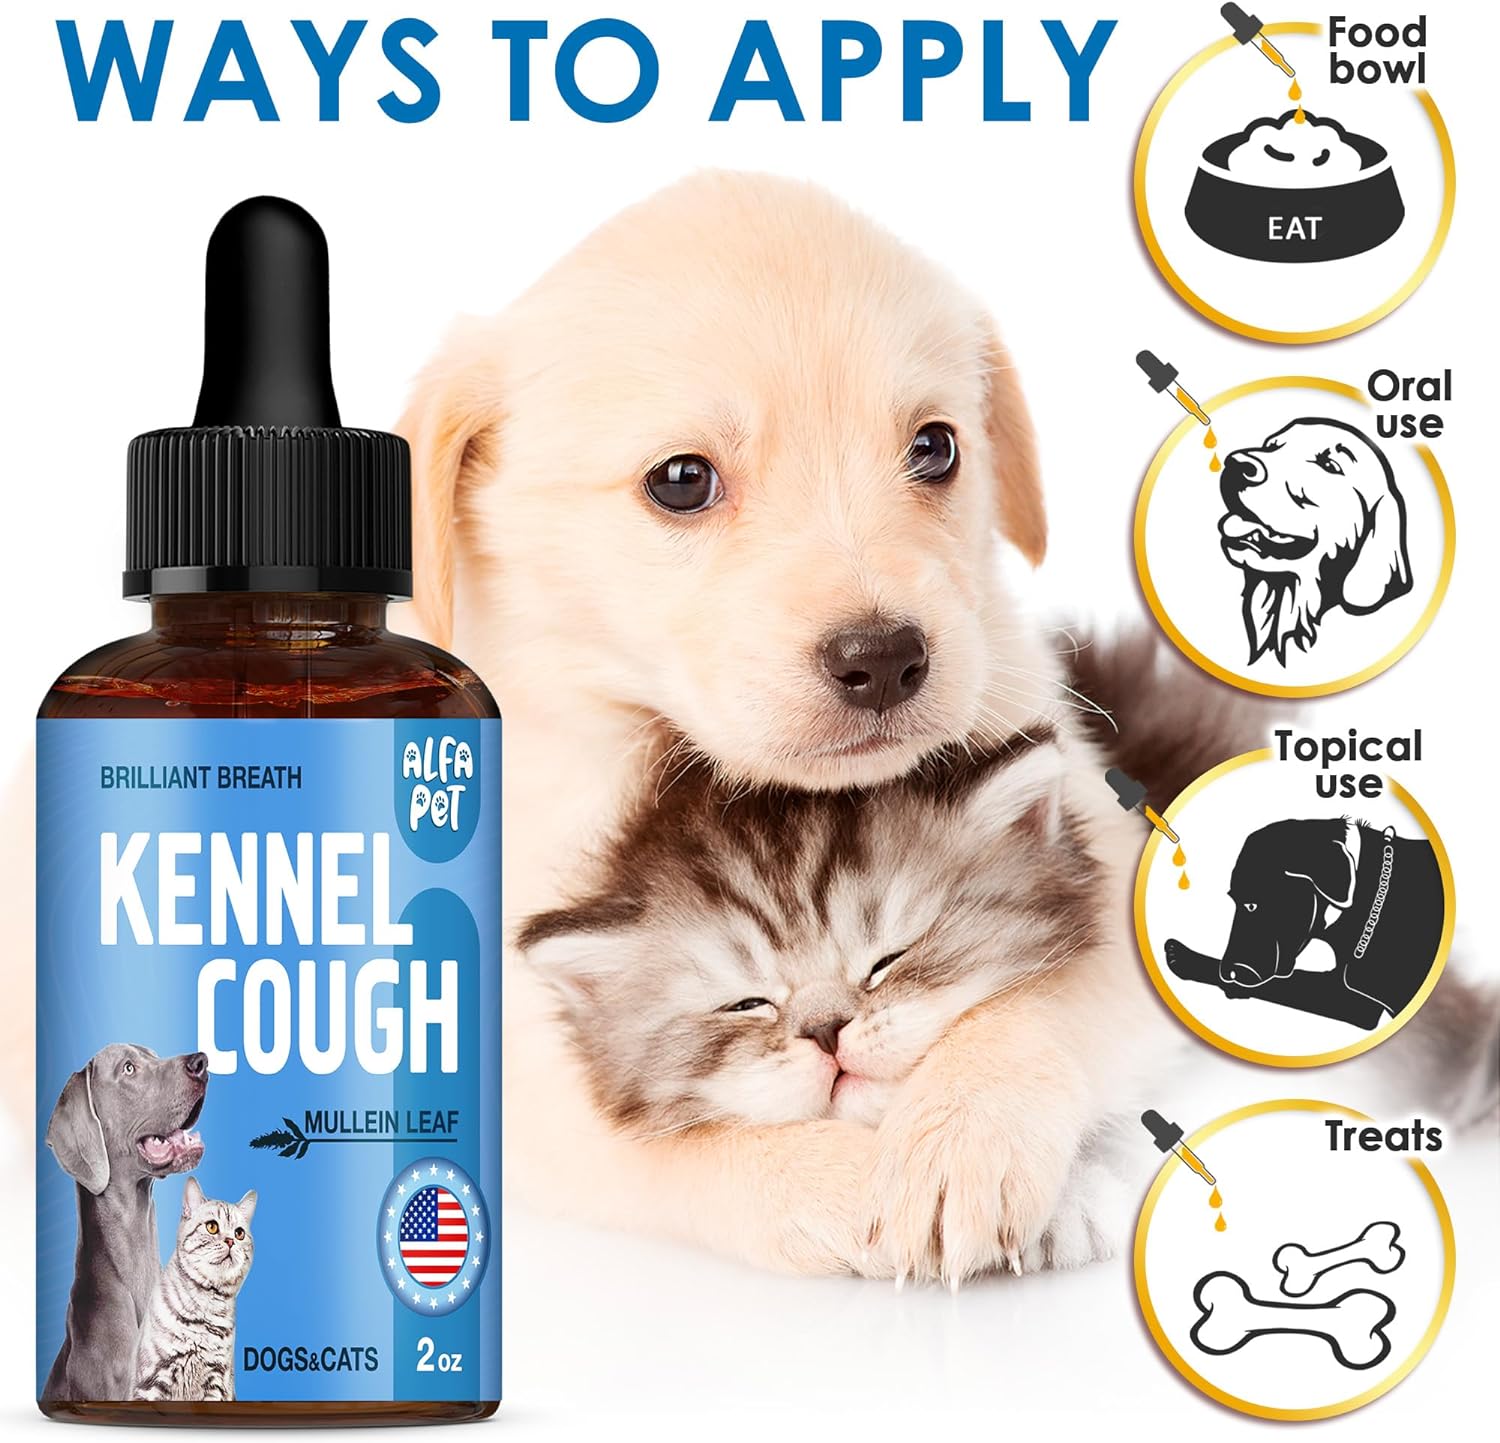 Dog Cough - Kennel Cough - Dog Allergy Relief - Supplements for Dogs & Cats Health - Allergy Relief Immune Supplement for Dogs - for Dry, Wet & Barkly : Pet Supplies